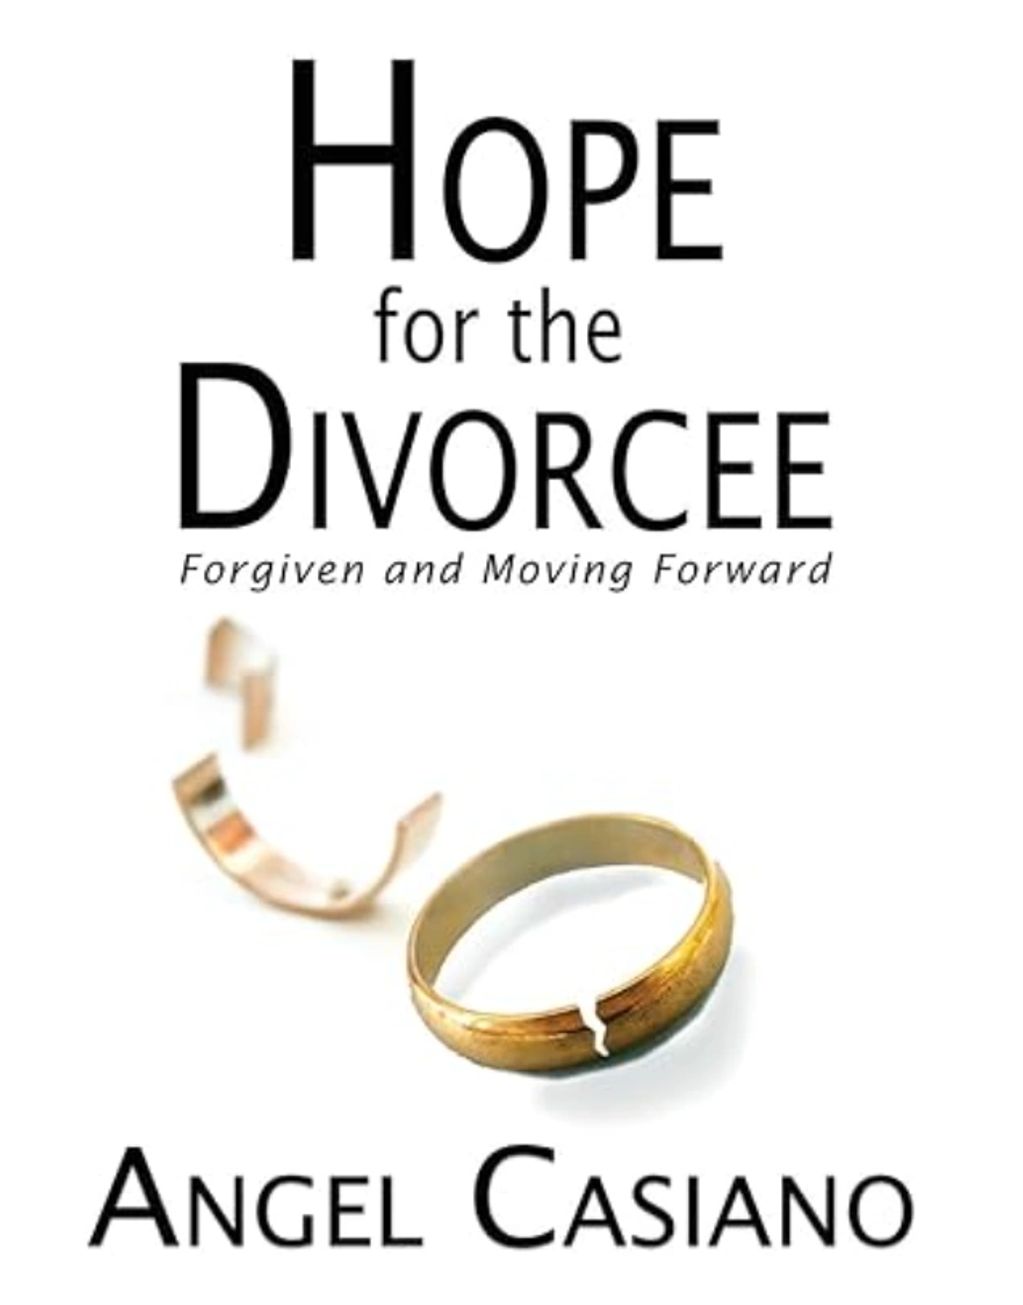 Angel Casiano Christian Counselor,  author of Hope for the Divorcee Forgiven and Moving Forward. 